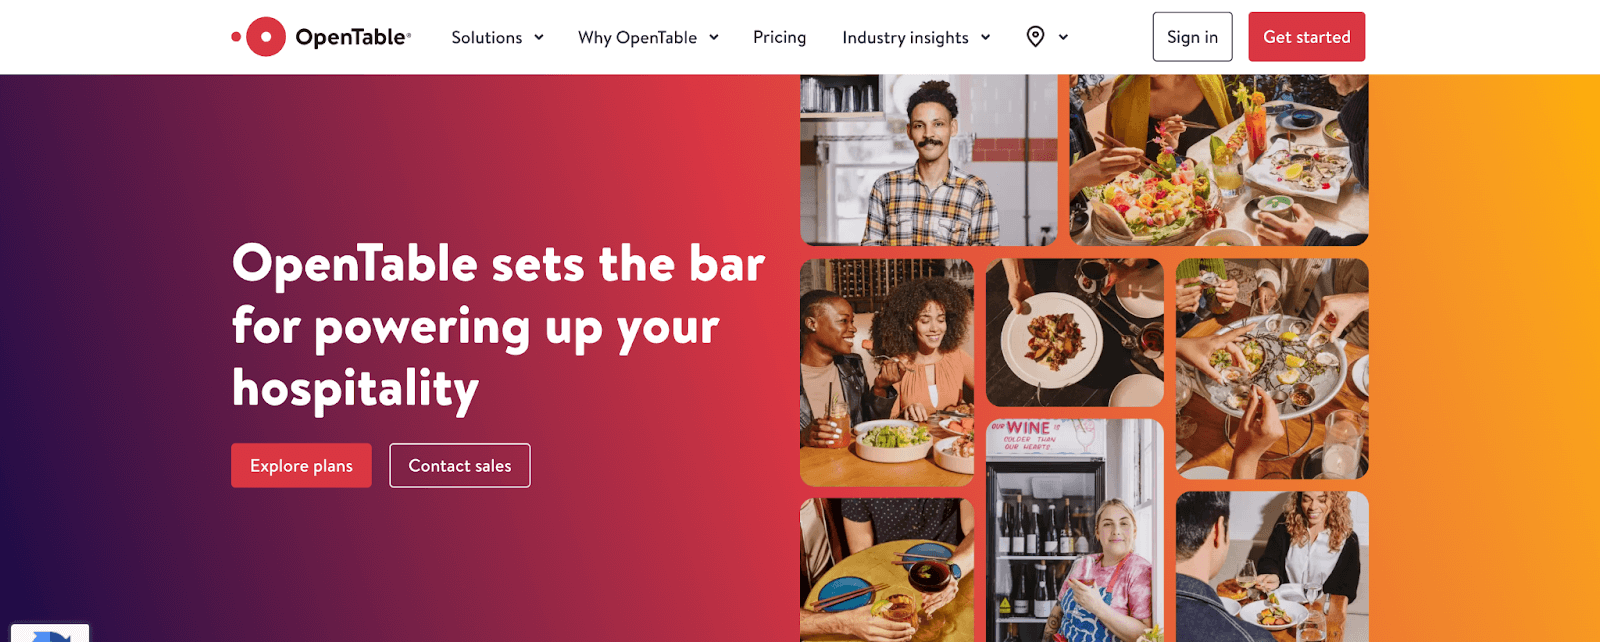 Screenshot of the best restaurant reservation software OpenTable homepage.